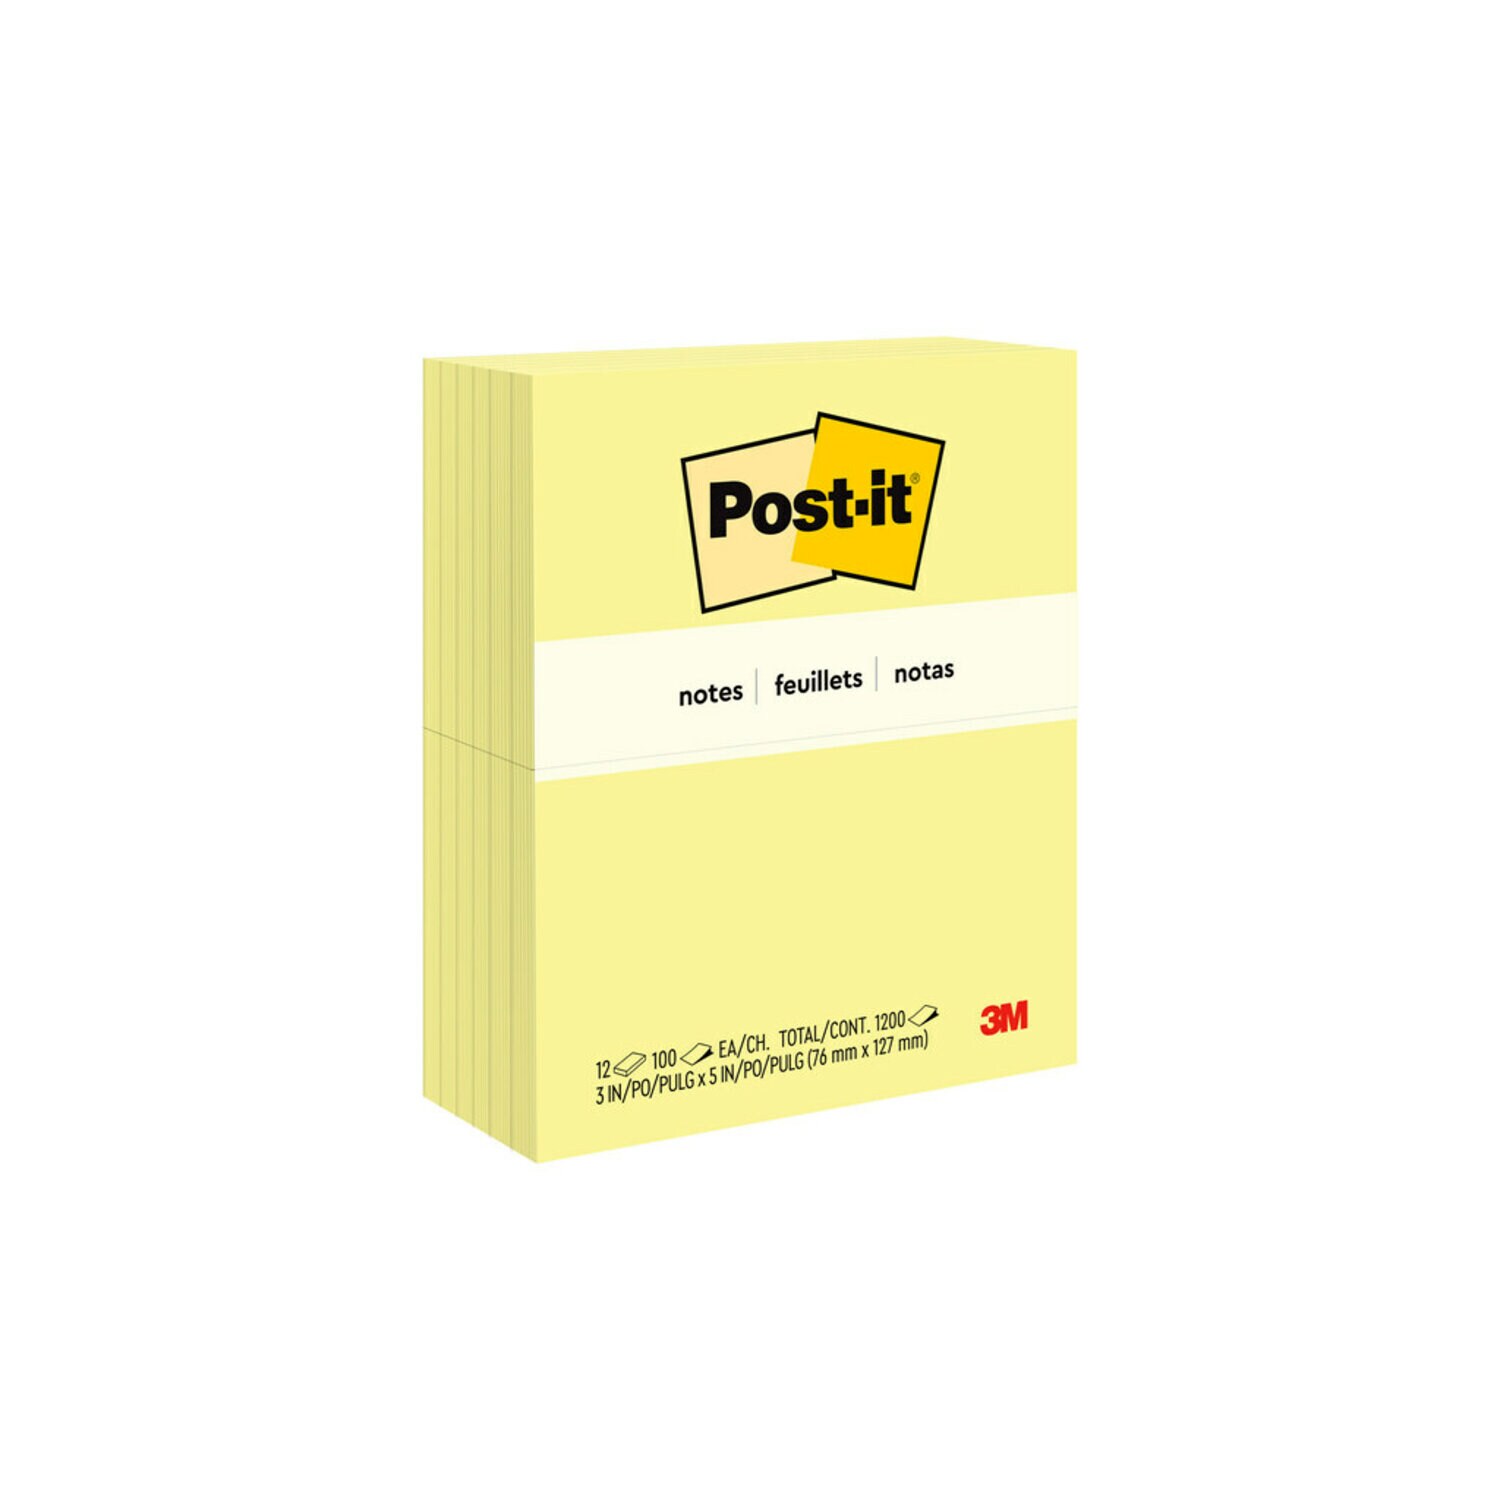 7100229673 - Post-it Notes 655, 3 in x 5 in (76 mm x 127 mm)